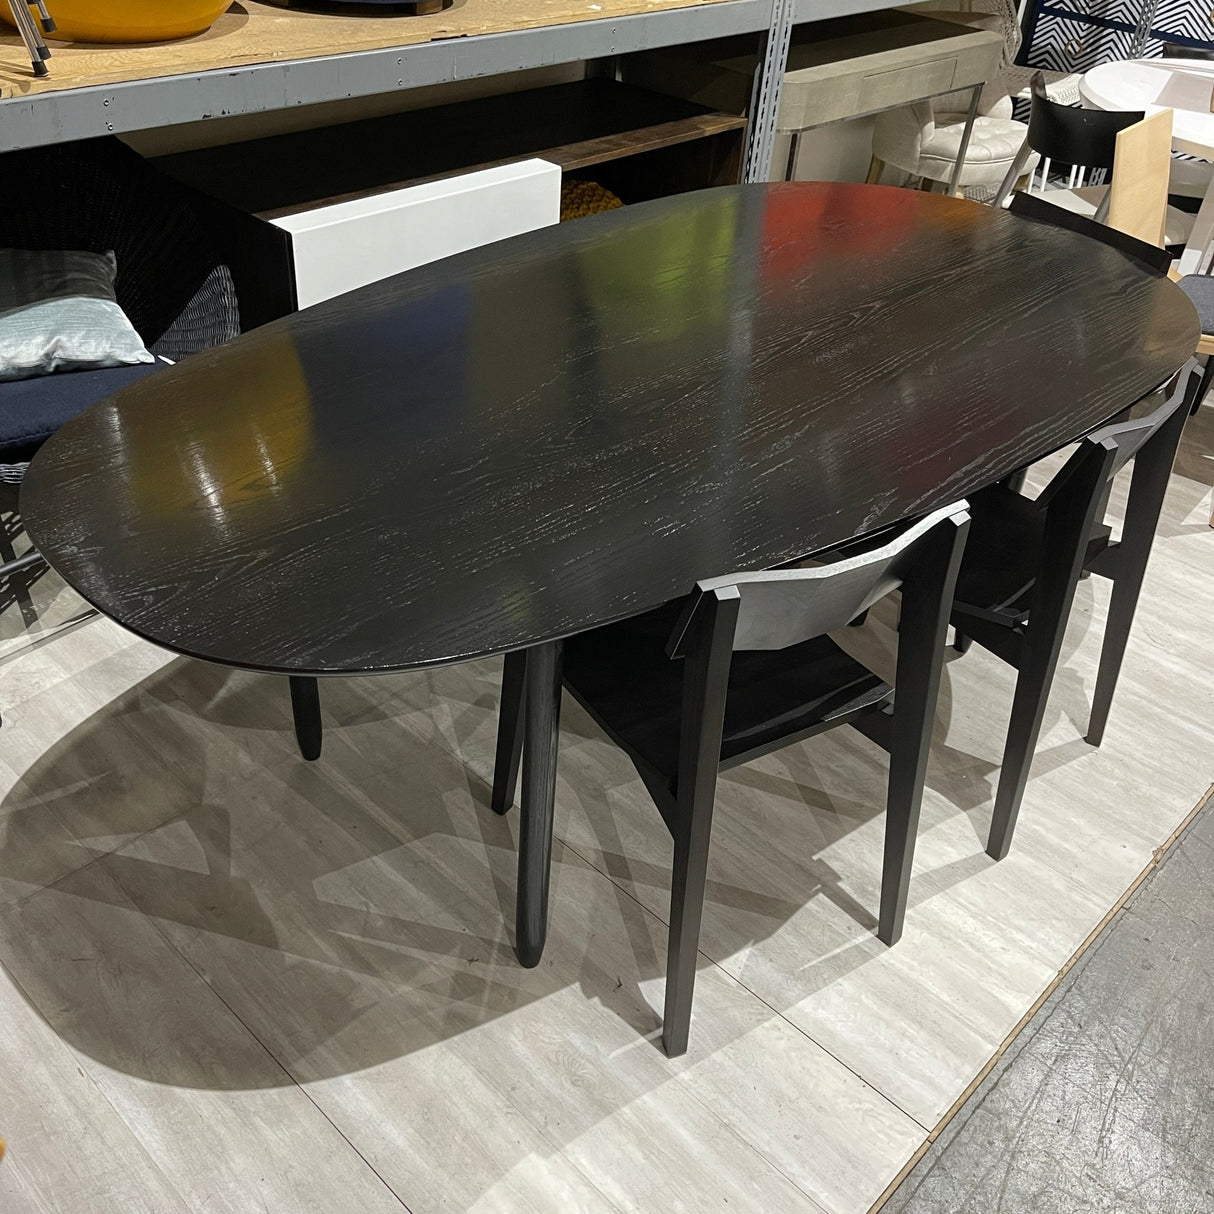 Bludot Swole 82 Dining table (Retail $2000+) - enliven mart